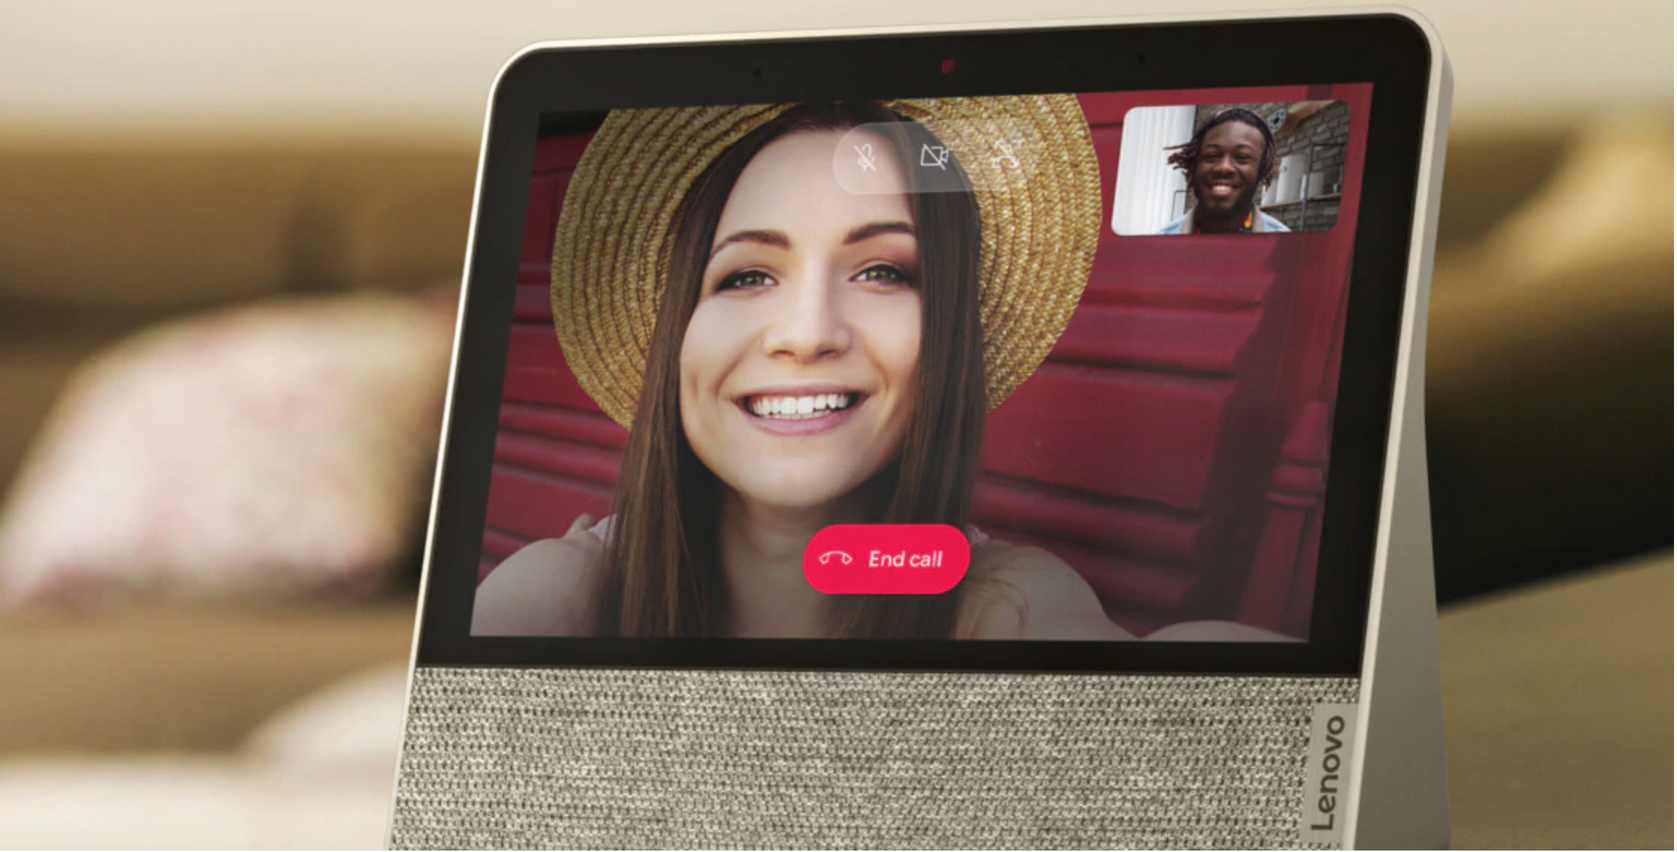 image of the Lenovo Smart Display showing a video call between a man and woman